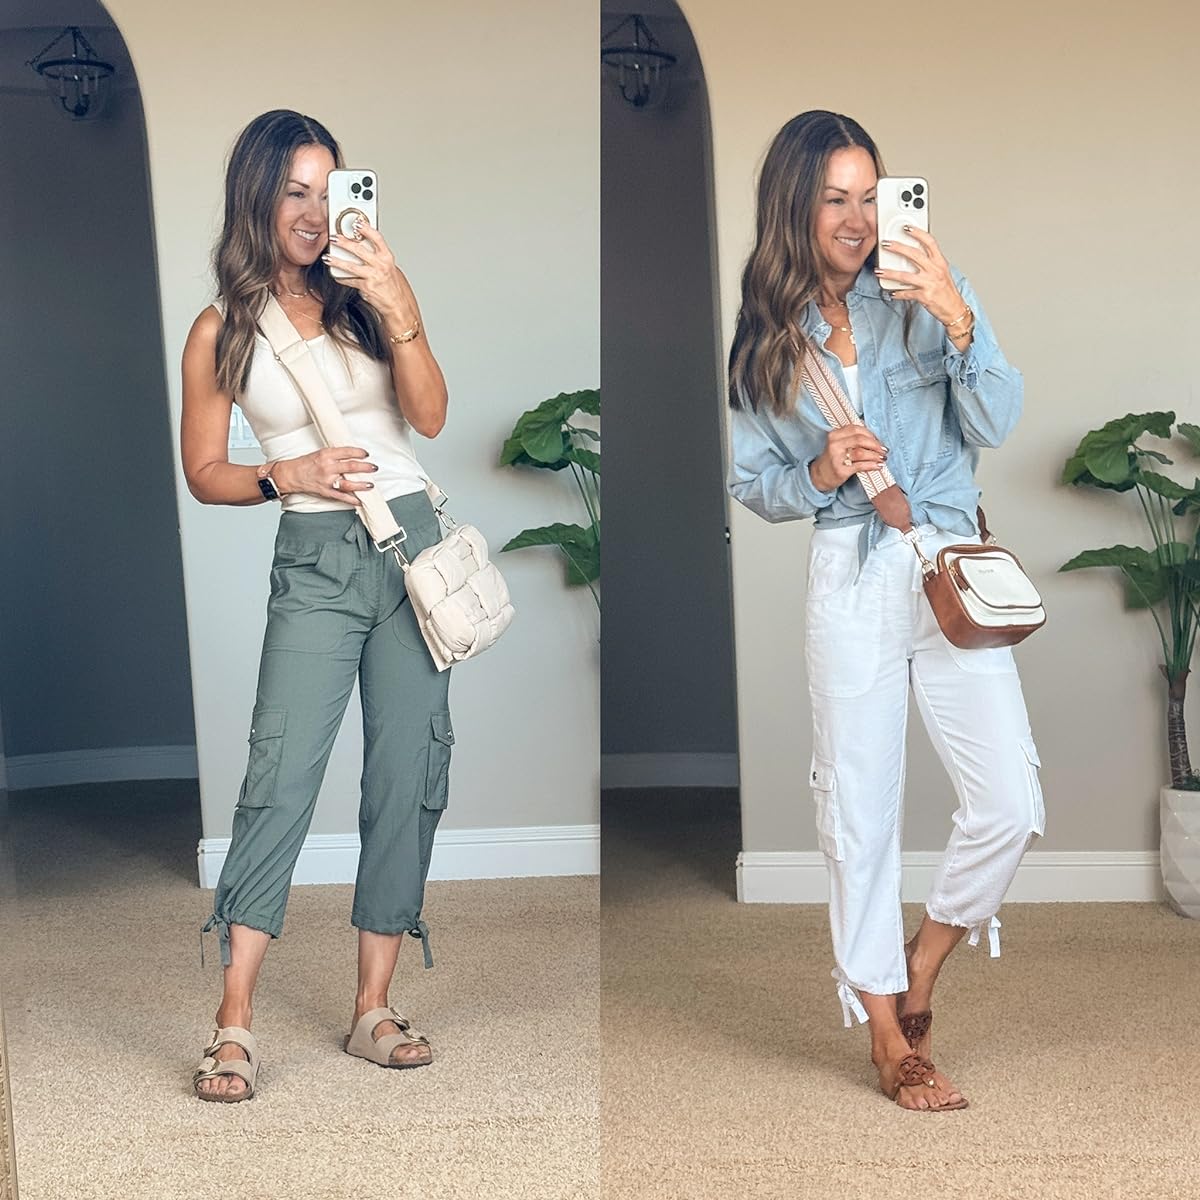 summer wardrobe essentials affordable everyday and casual outfit ideas | summer, summer outfit, everyday outfit, casual outfit, amazon, casual outfit idea, versatile fashion, cargo pants, denim shirt, sandals, purse